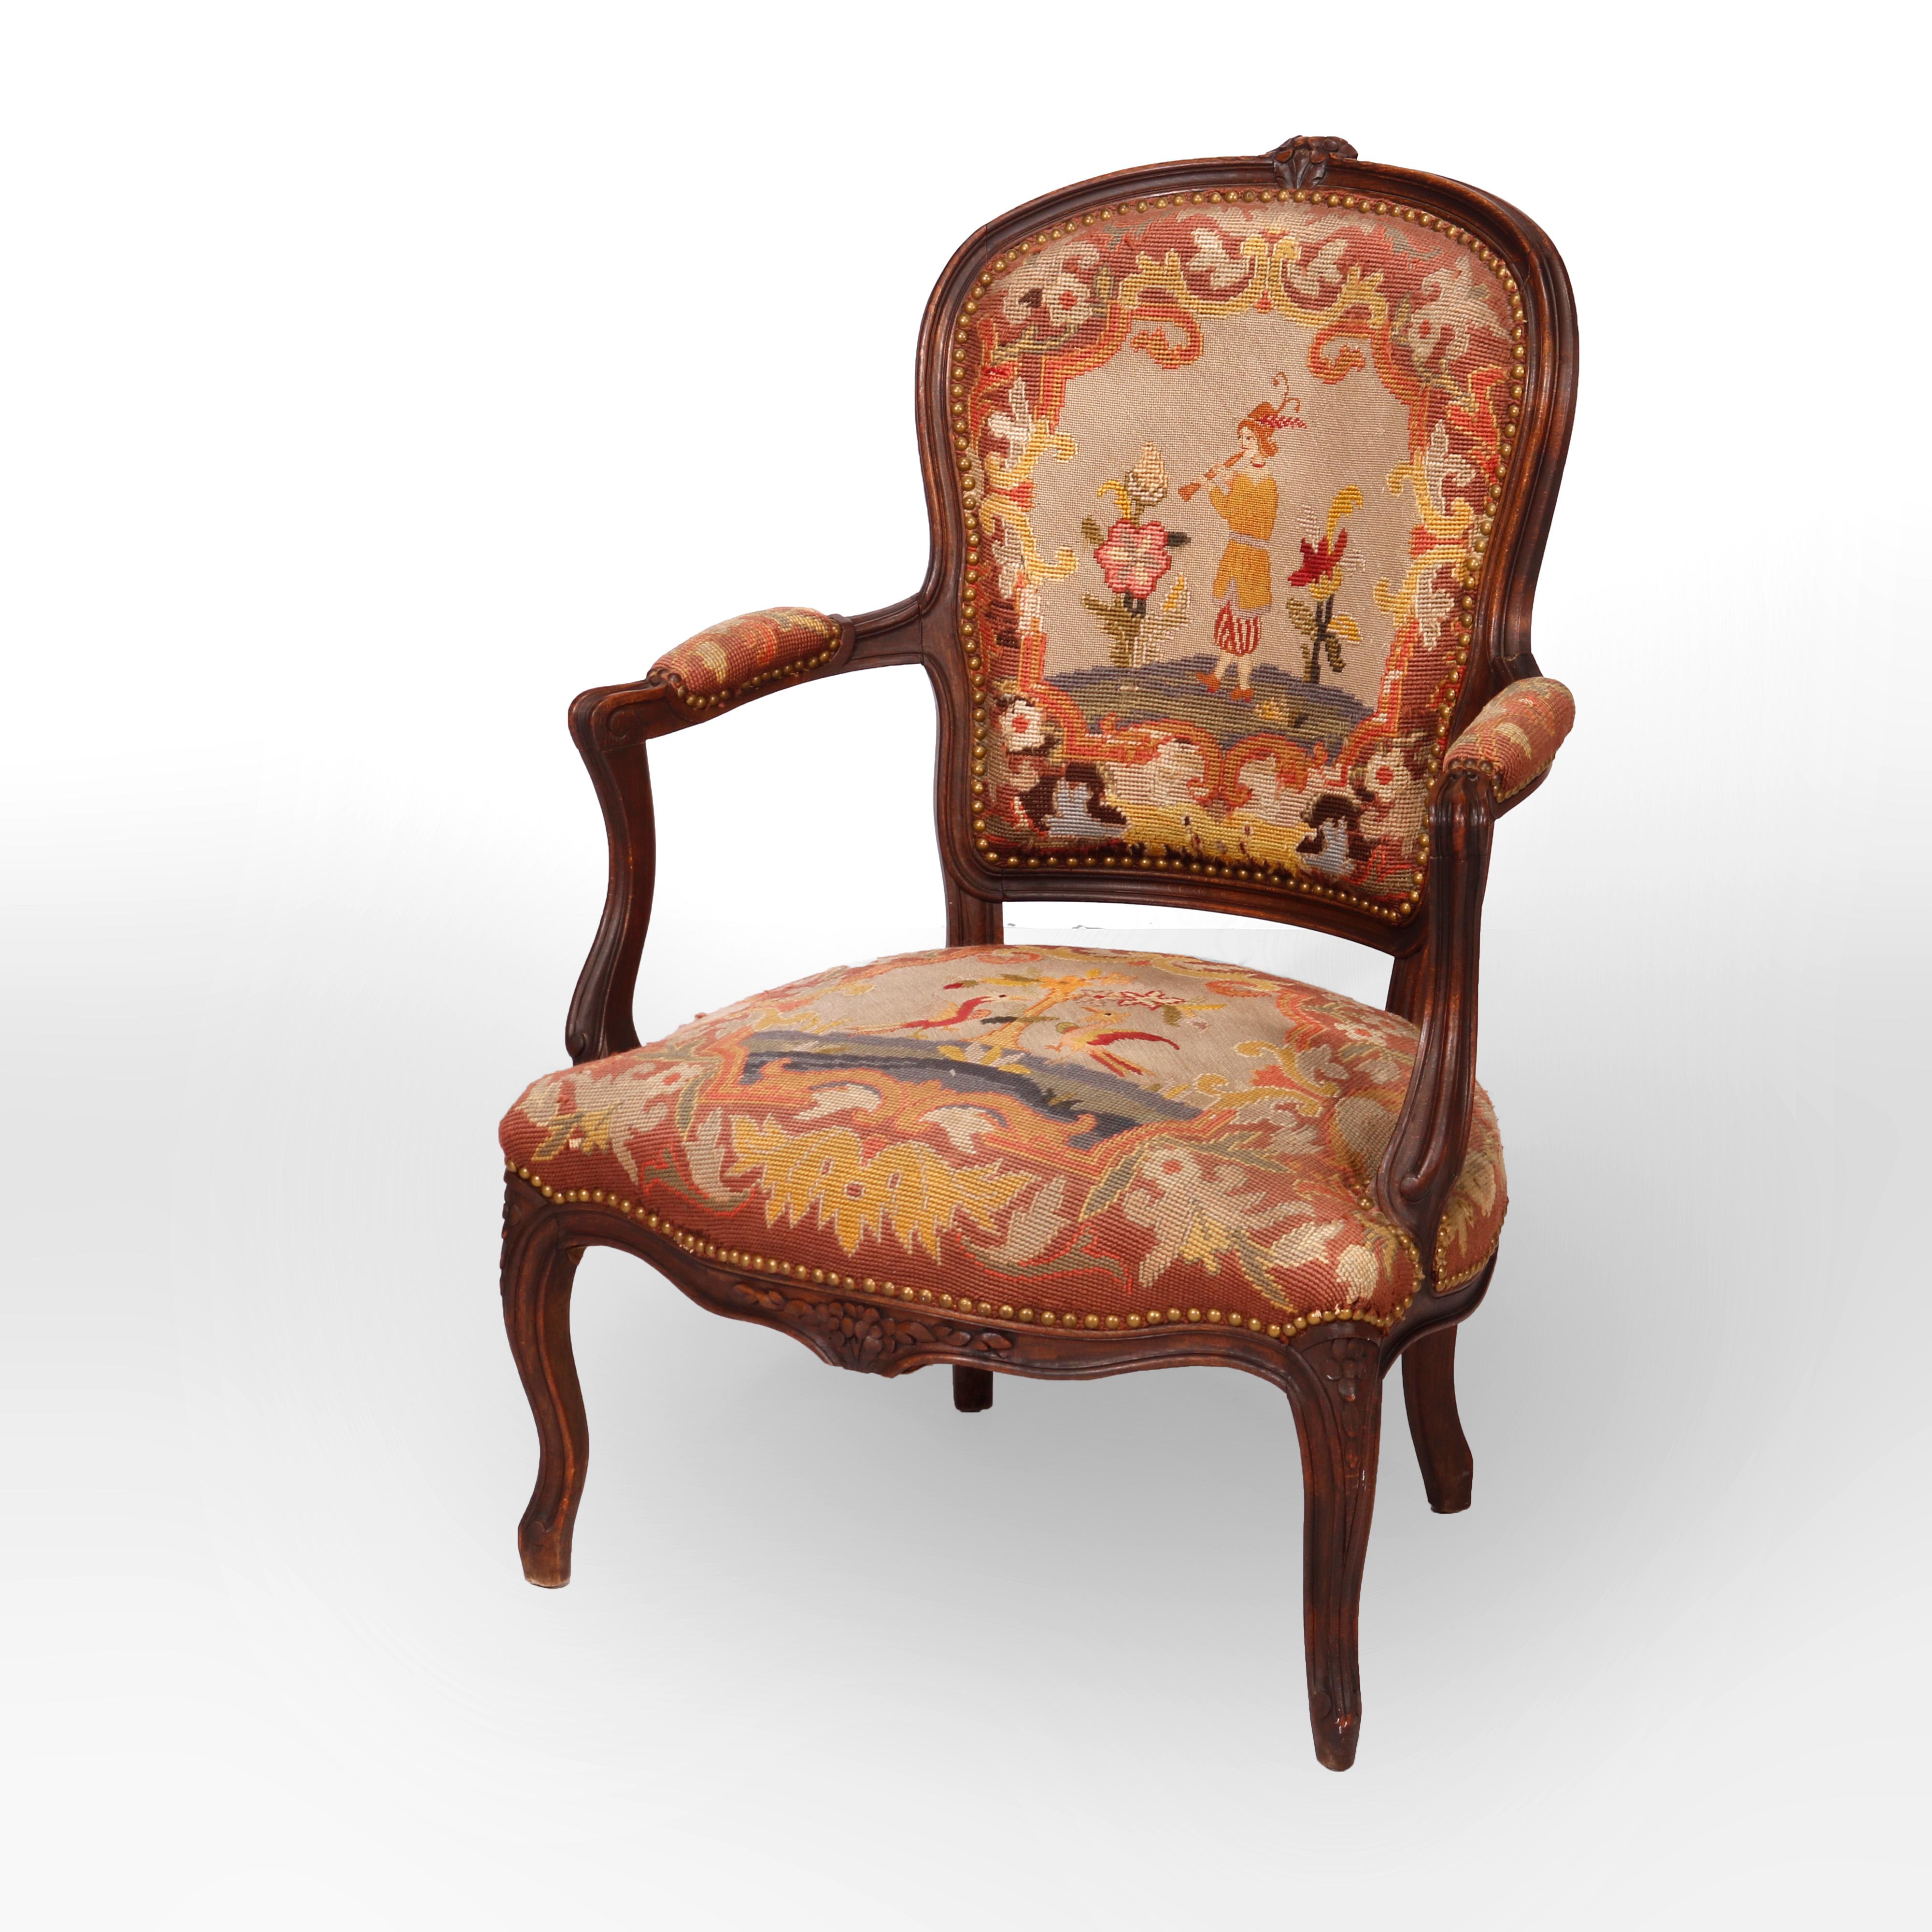 An antique French Louis XV stye armchair offers walnut frame with carved foliate crest over tapestry back and seat, raised on cabriole legs, c1900

Measures - 37.5''H X 25.5''W X 26.5''D